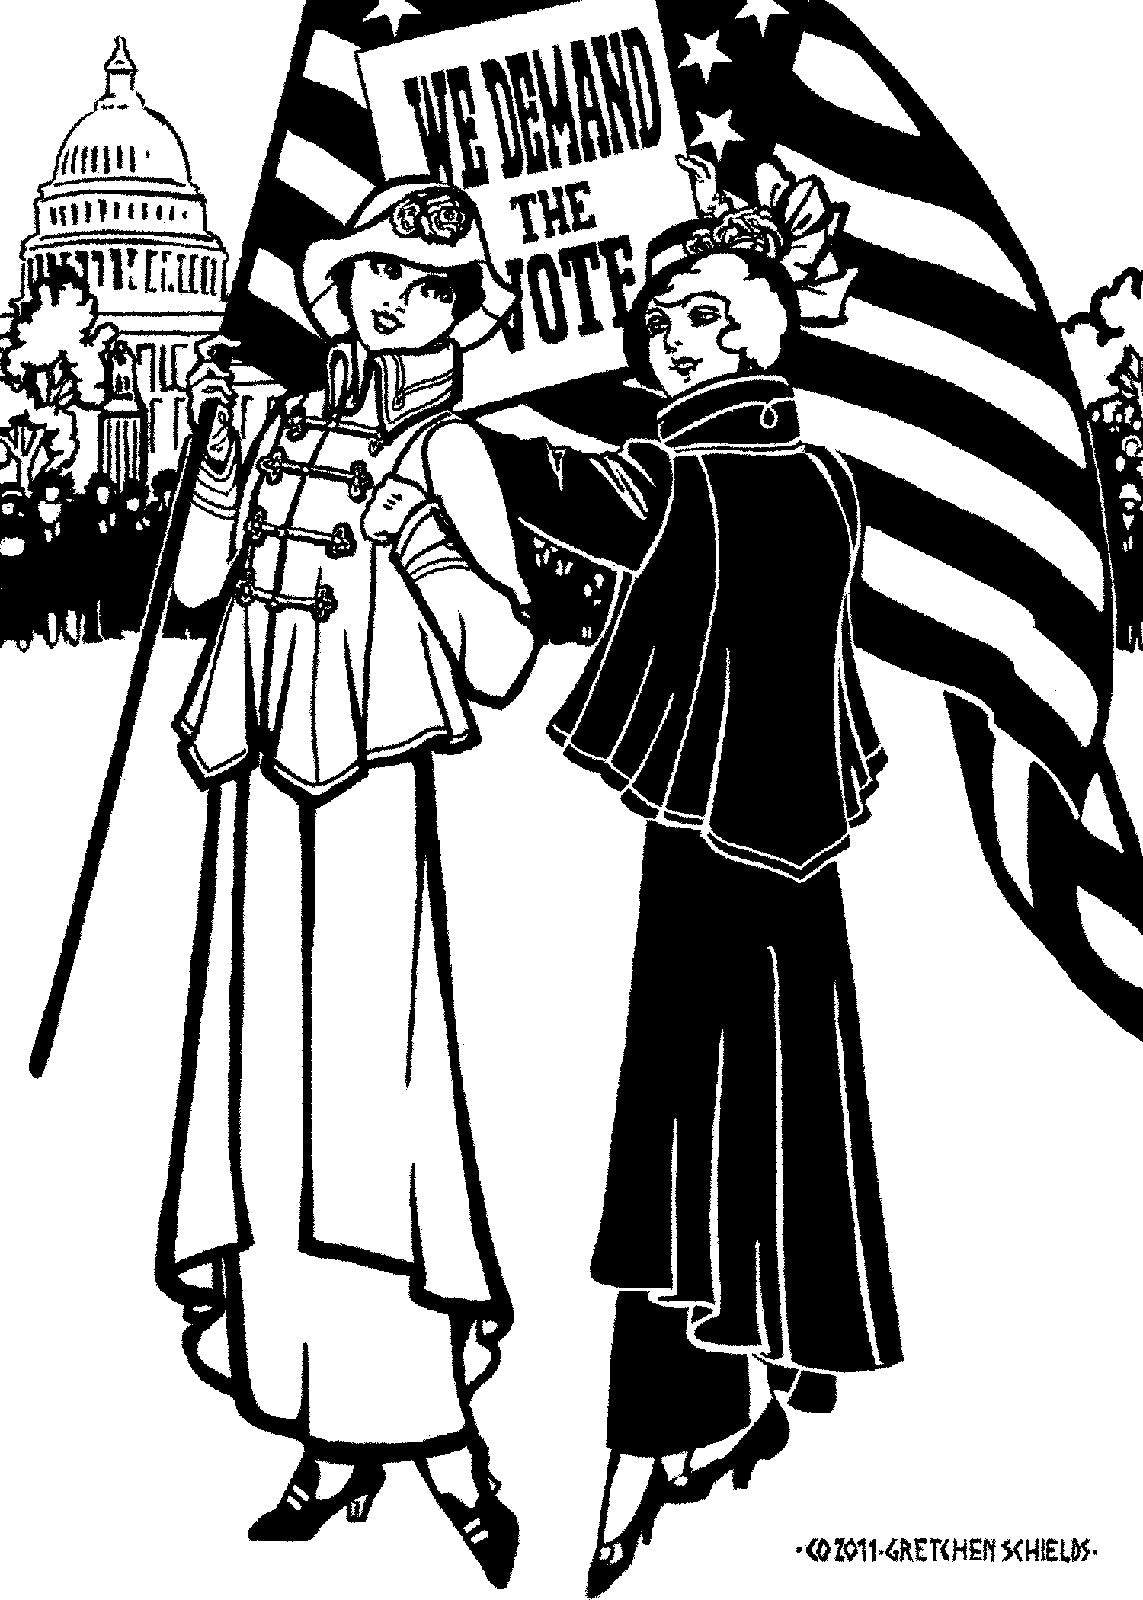 Black and white pen and ink drawing by artist Gretchen Shields. Two women both wearing the #268 Metropolitan Suit and hats. Woman on the left is facing front holding an American flag. The woman on the right, her back is turned holding  "We demand the vote sign."